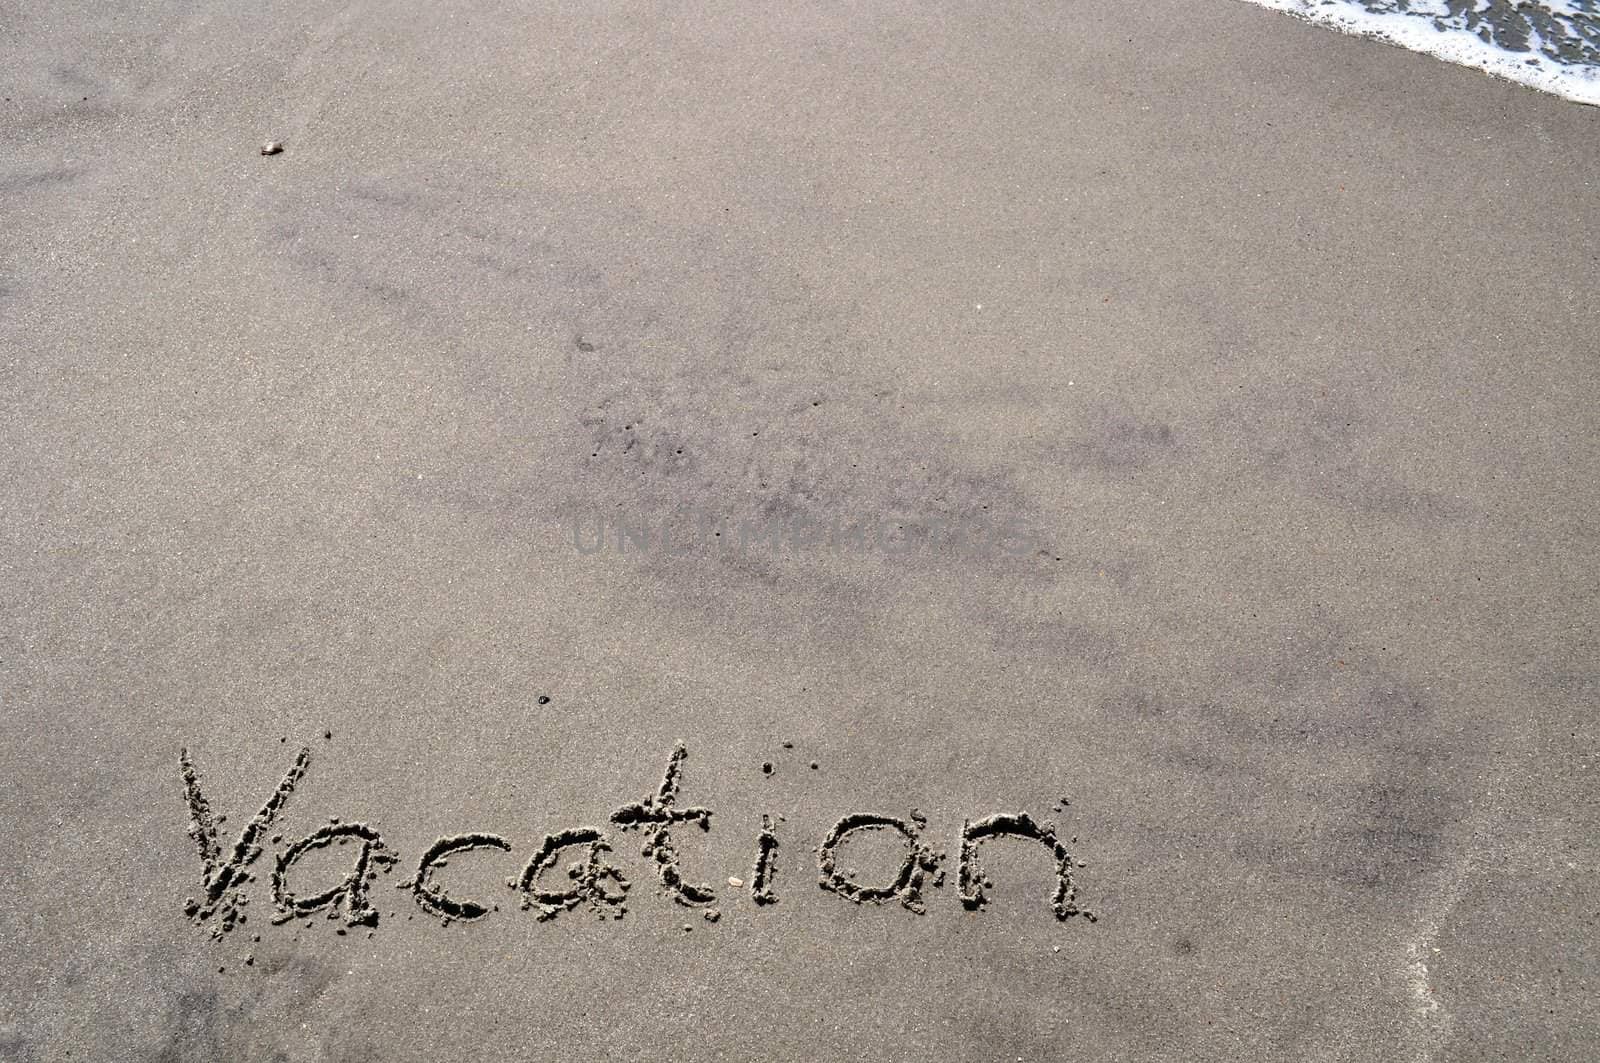 Vacation In the Sand